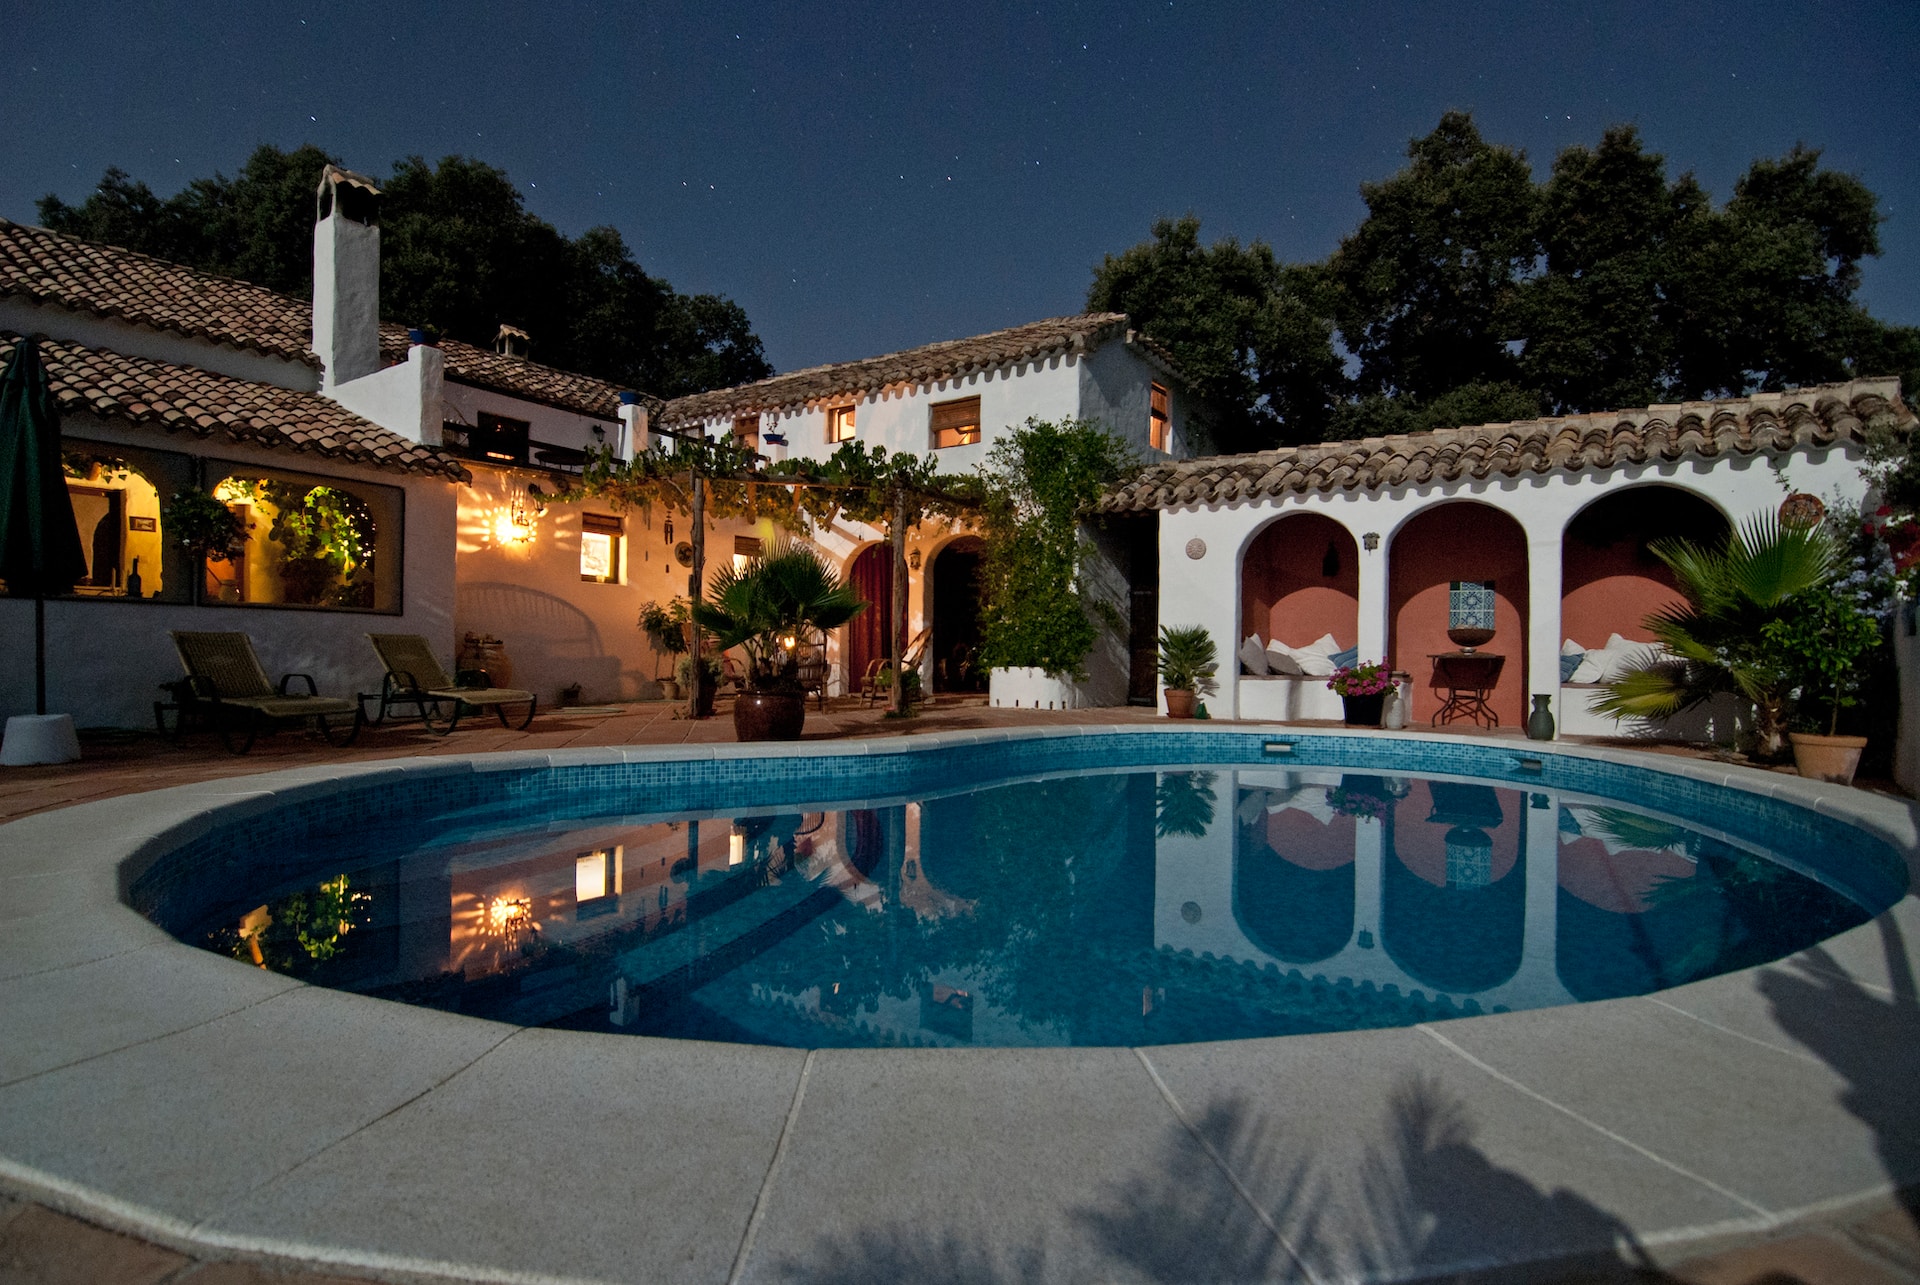 Ensuring That Adding a Pool Also Adds Serious Value to Your Home